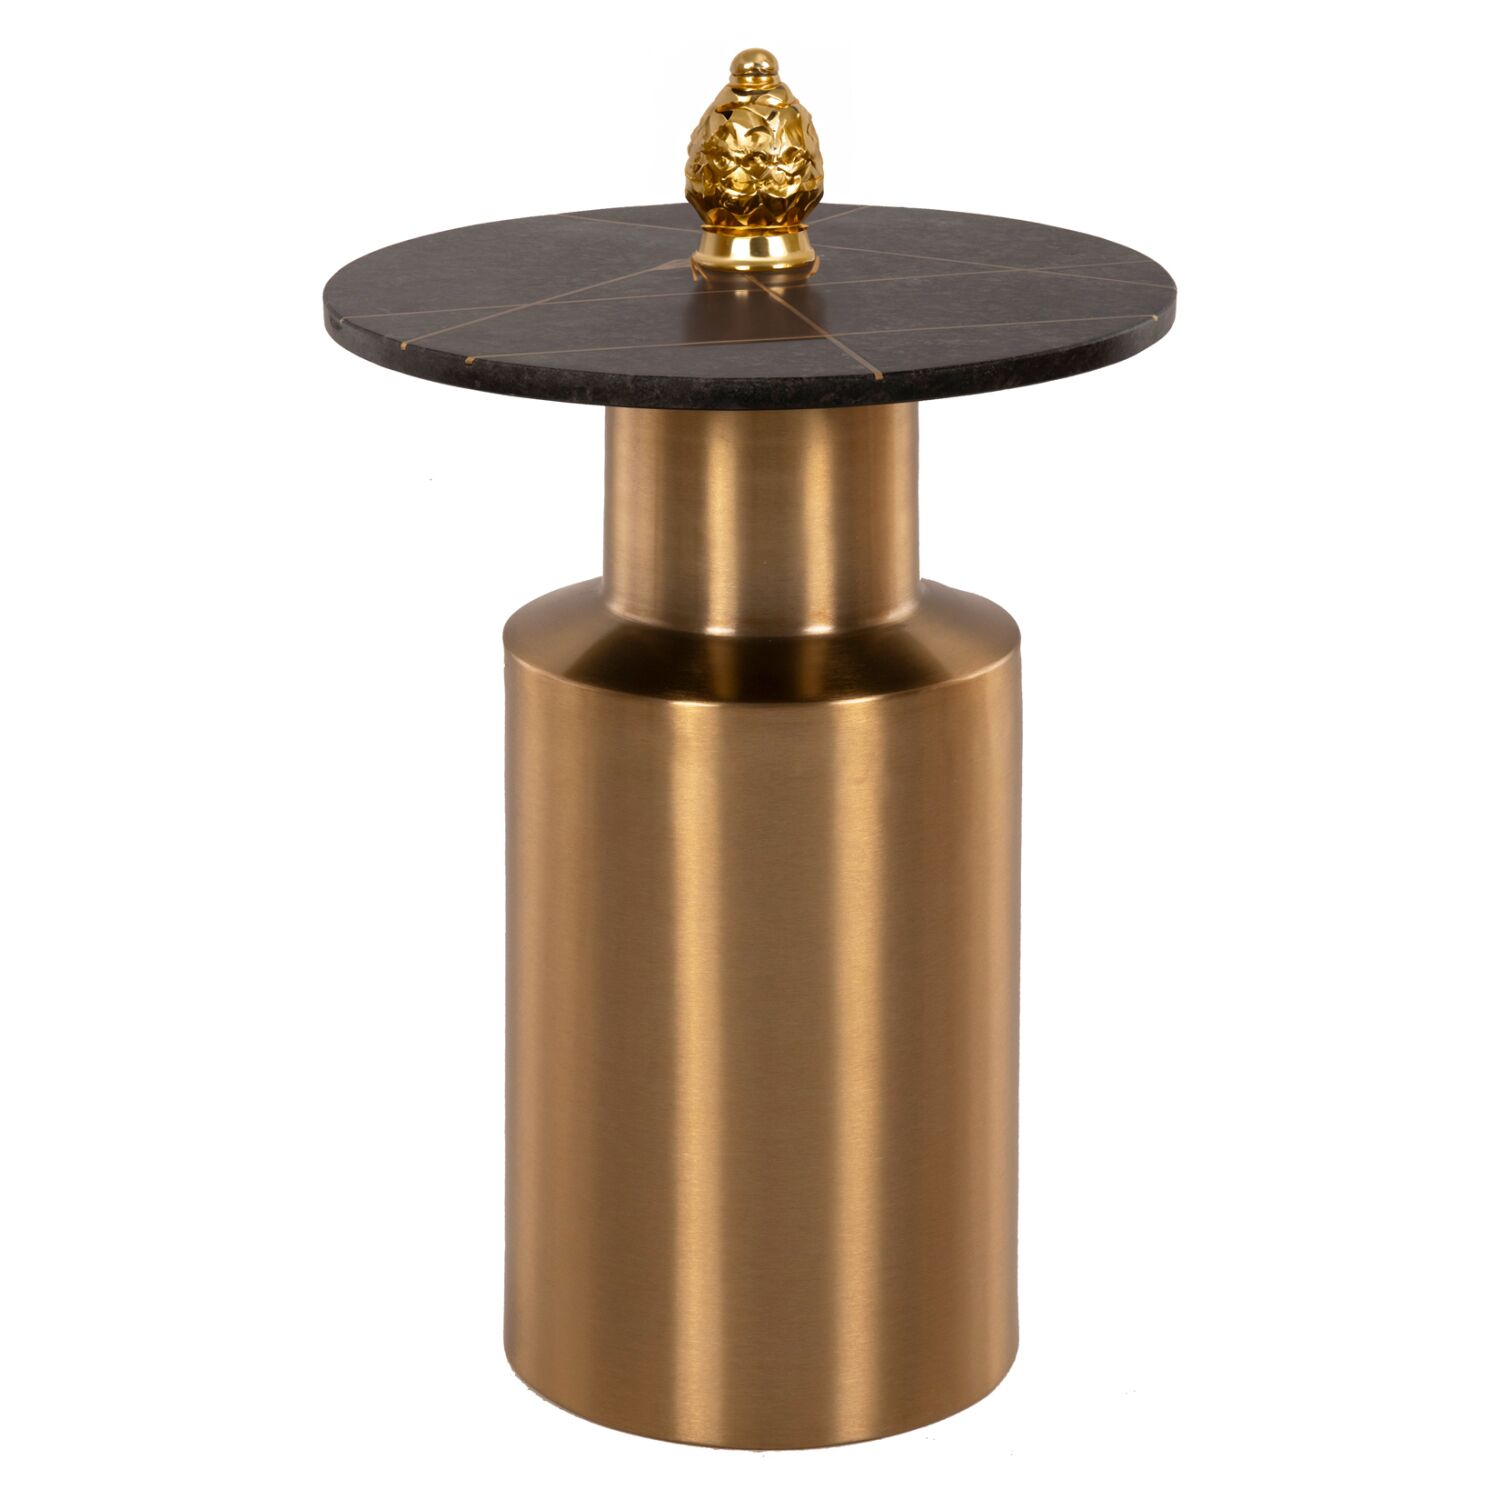 SIDE TABLE CLAYDEE HM9675 METAL IN GOLD-BLACK INLAY MARBLE TOP Φ41x54,5Hcm.